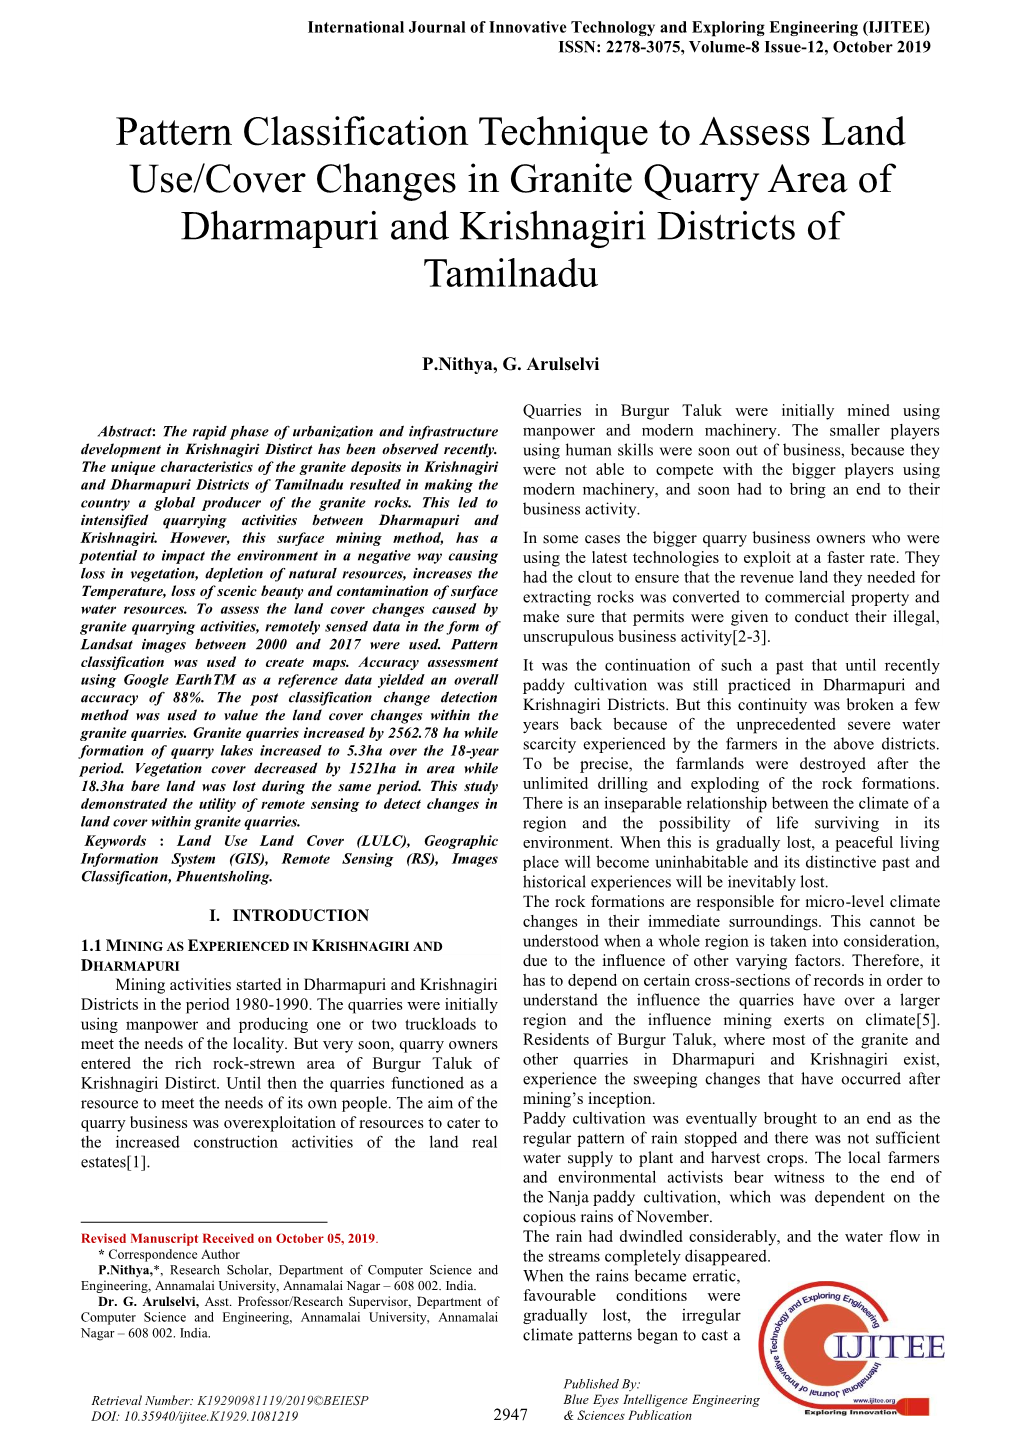 Pattern Classification Technique to Assess Land Use/Cover Changes in Granite Quarry Area of Dharmapuri and Krishnagiri Districts of Tamilnadu